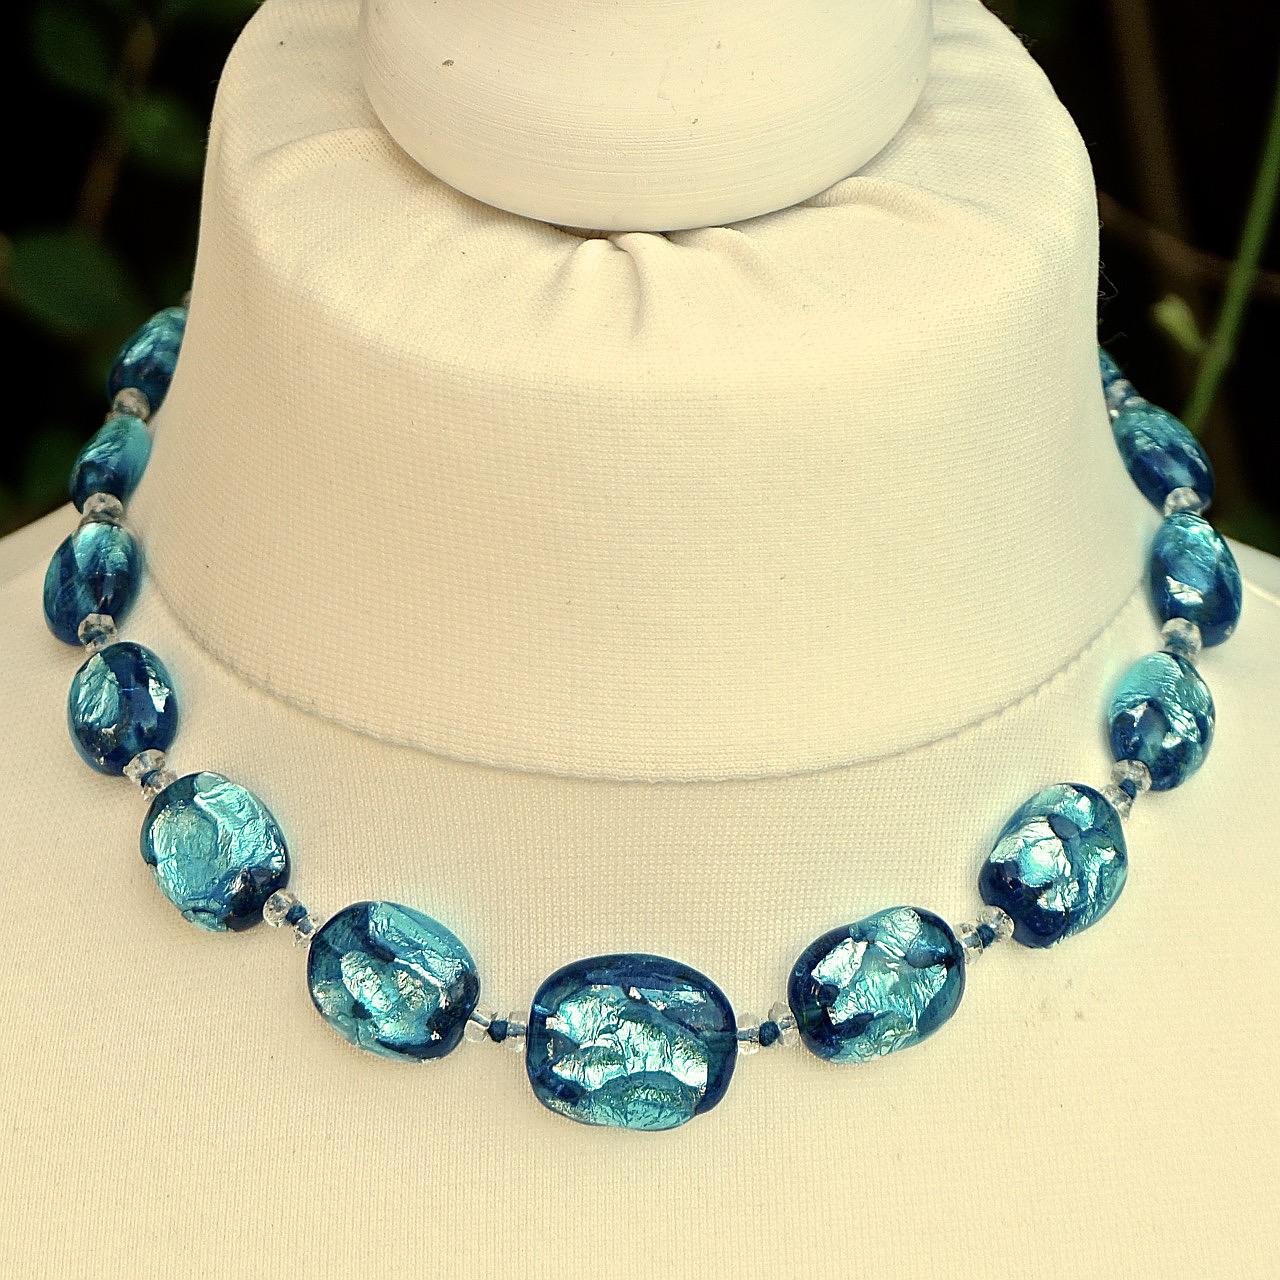 Graduated Blue Foil Glass Bead Necklace with a Silver Clasp For Sale 1